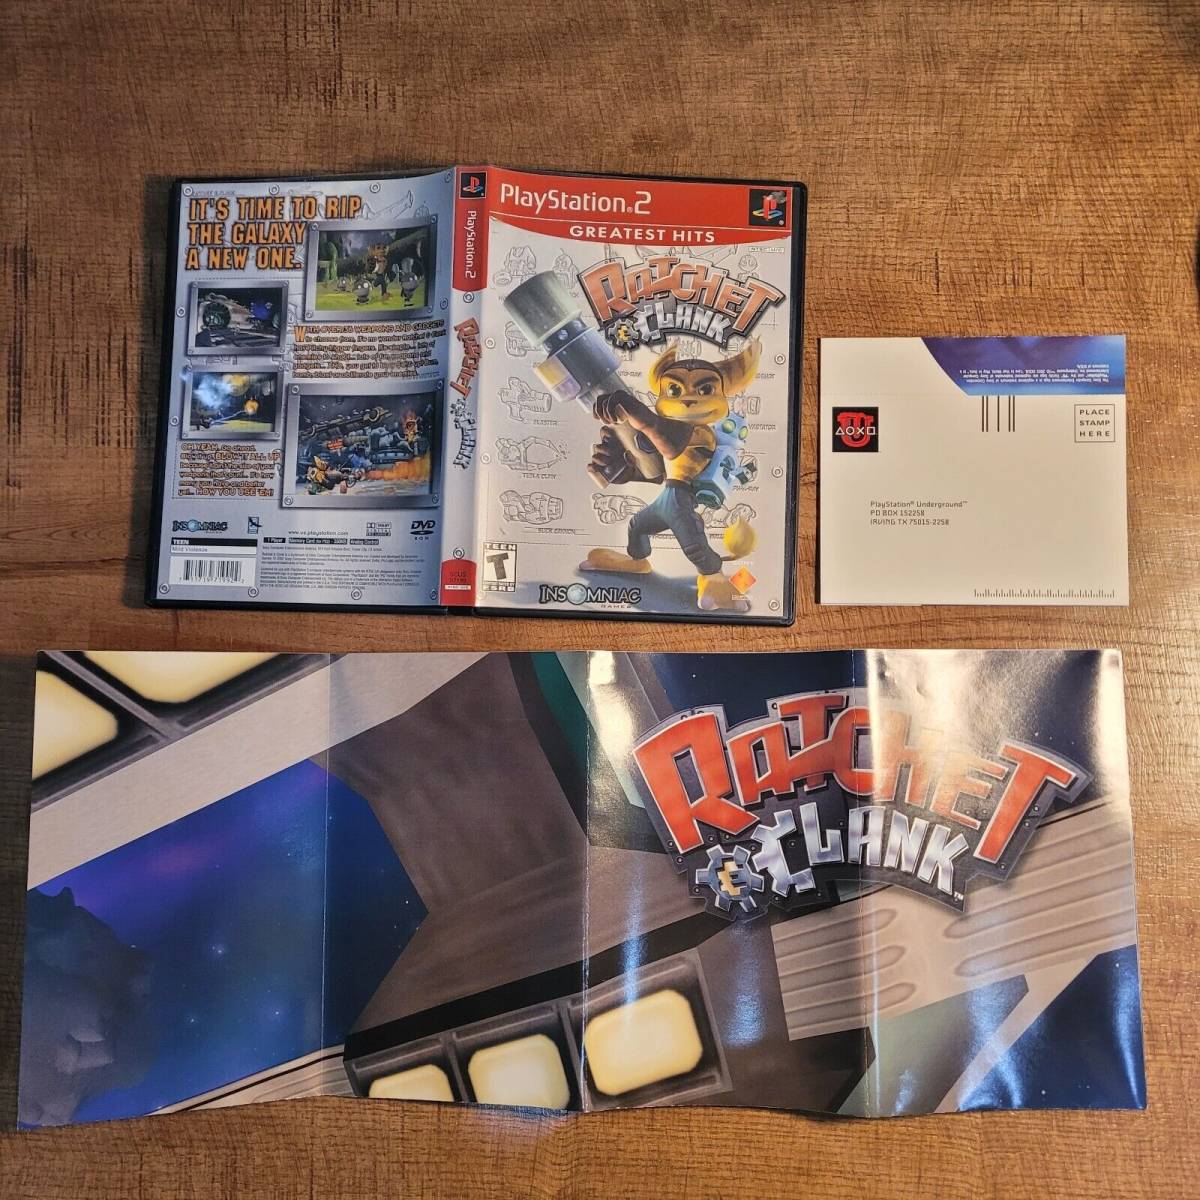 Ratchet & Clank Greatest Hits PS2 Sony PlayStation 2, 2003 Poster Included CIB 海外 即決